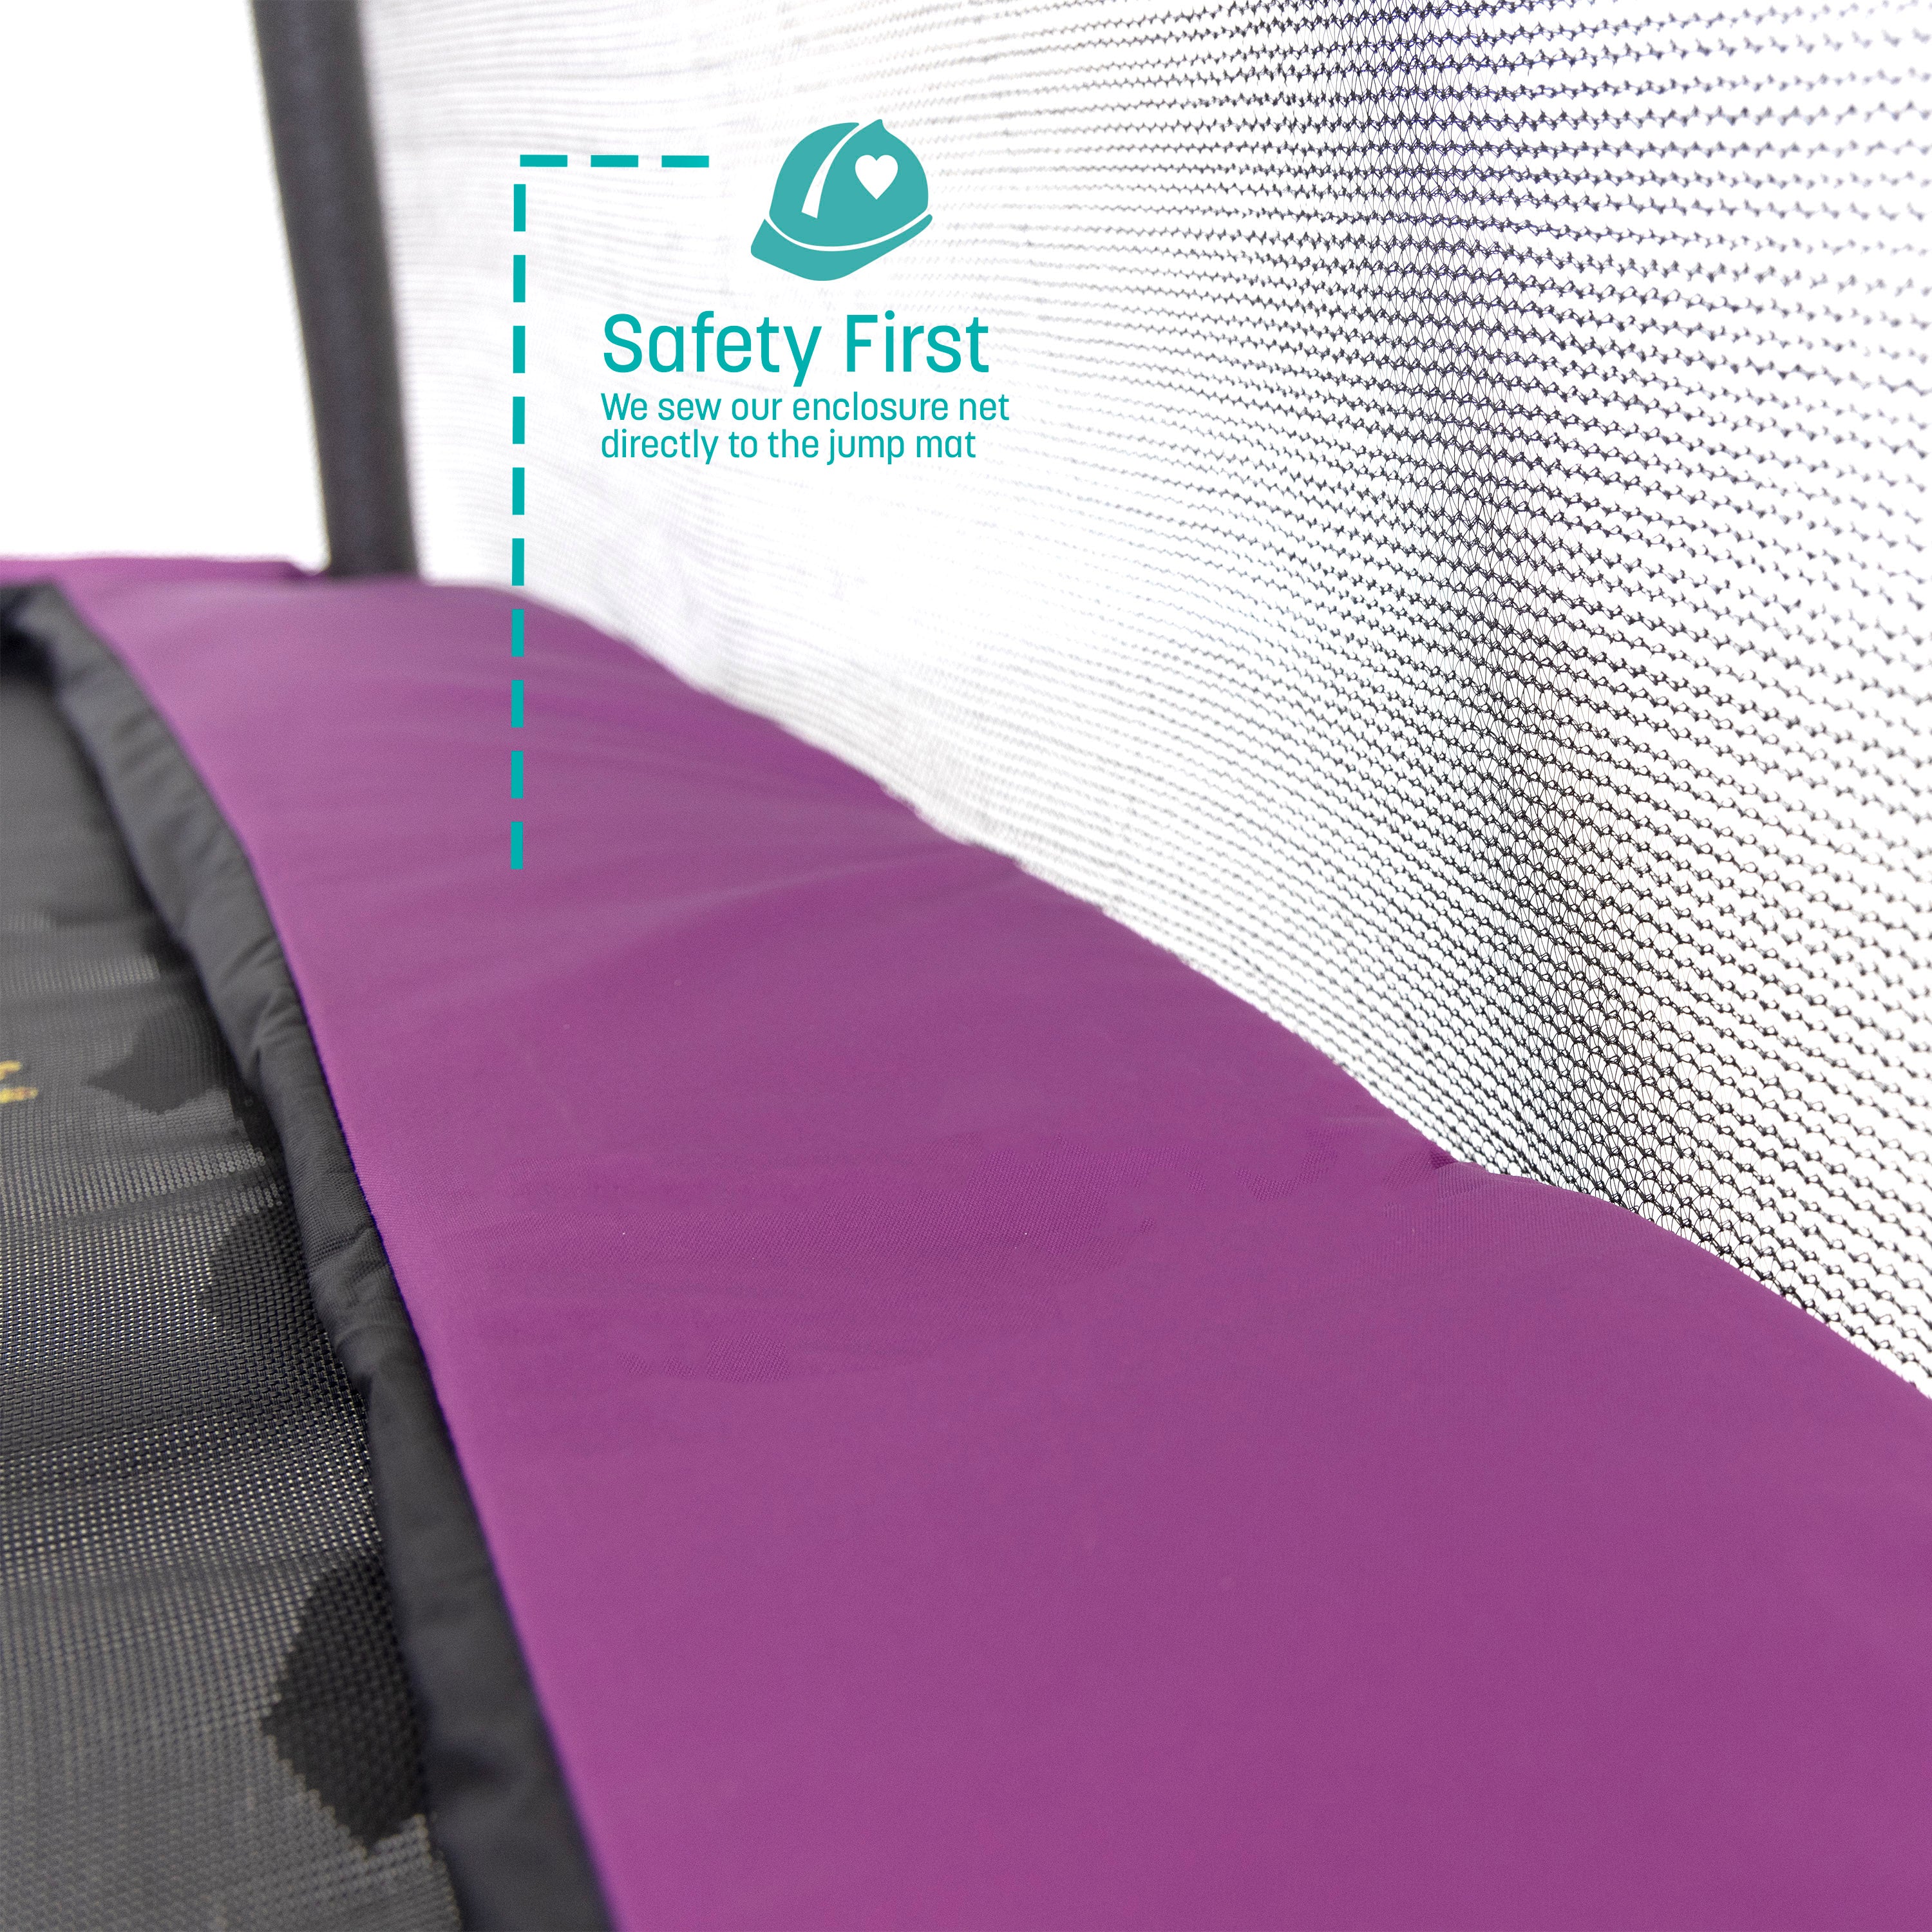 The spring pad is purple. A teal callout feature states, “Safety First: We sew our enclosure net directly to the jump mat”.